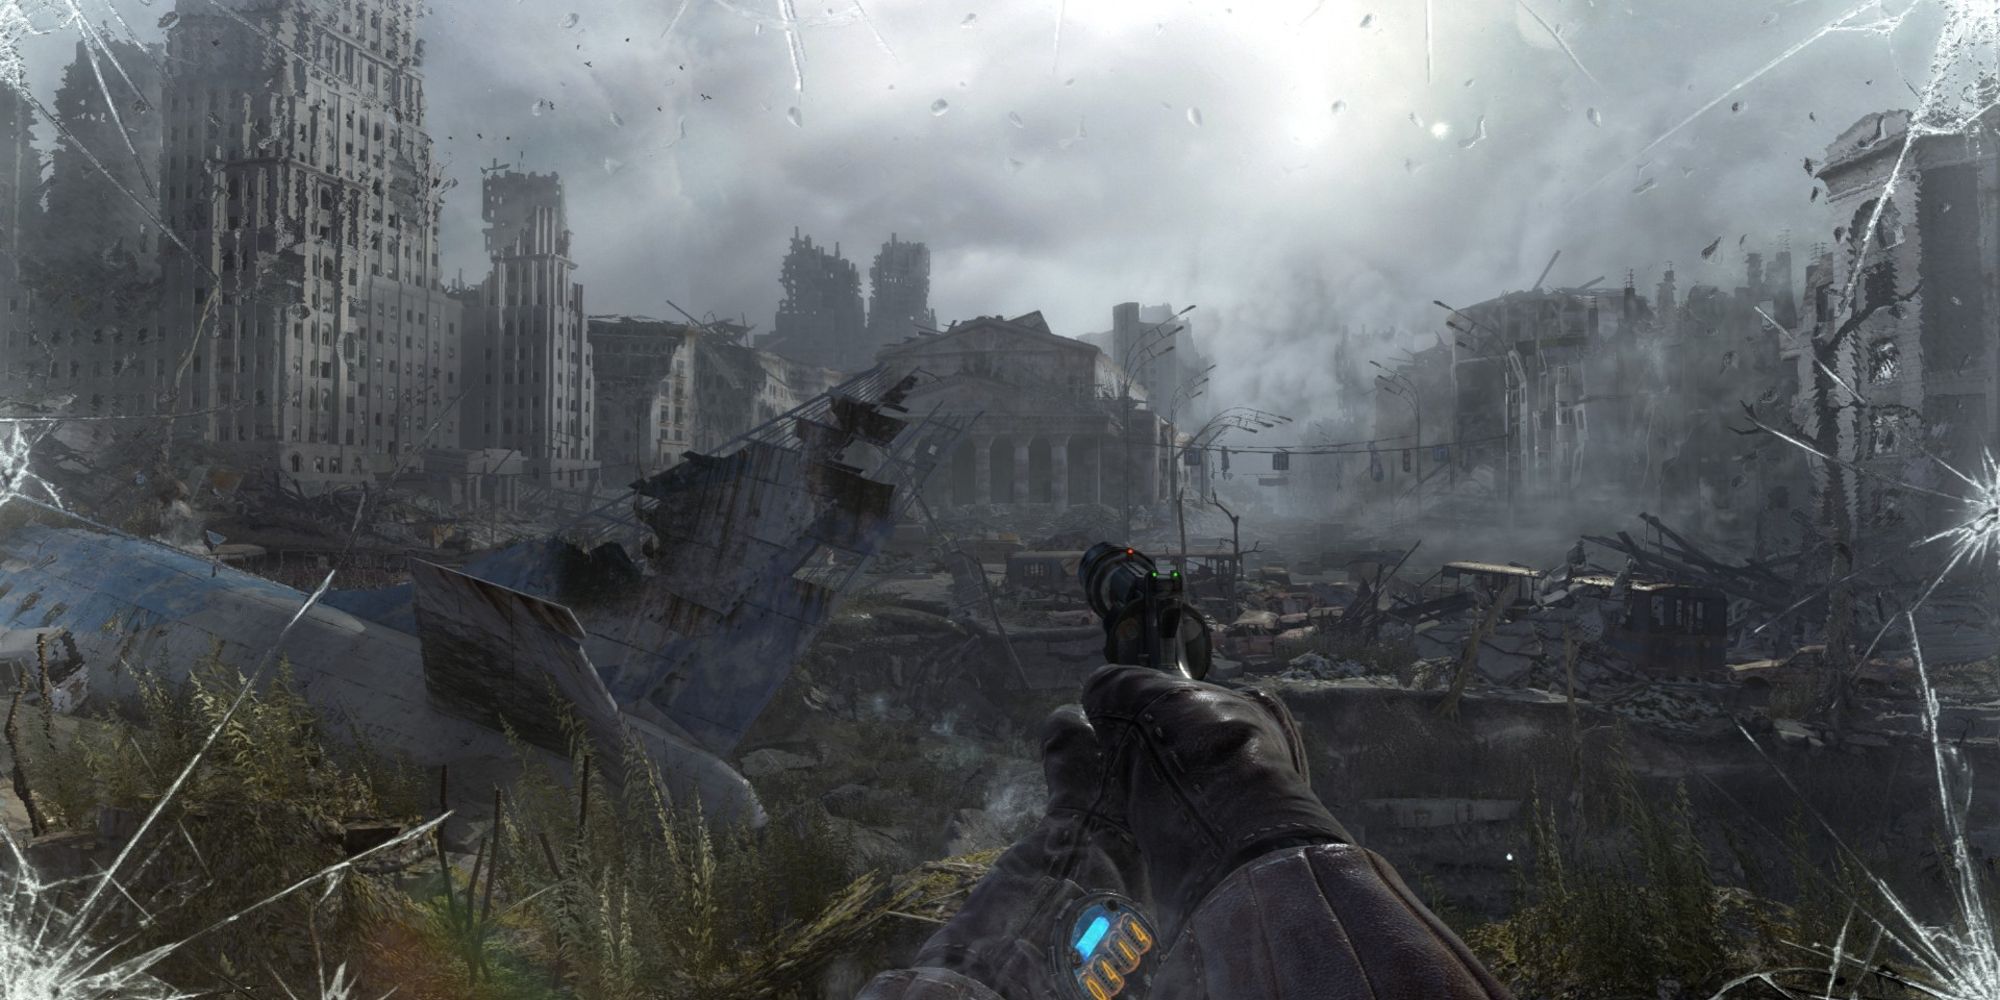 Metro 2033 Holding Pistol Viewing Ruins Of A Nuclear Devasted City